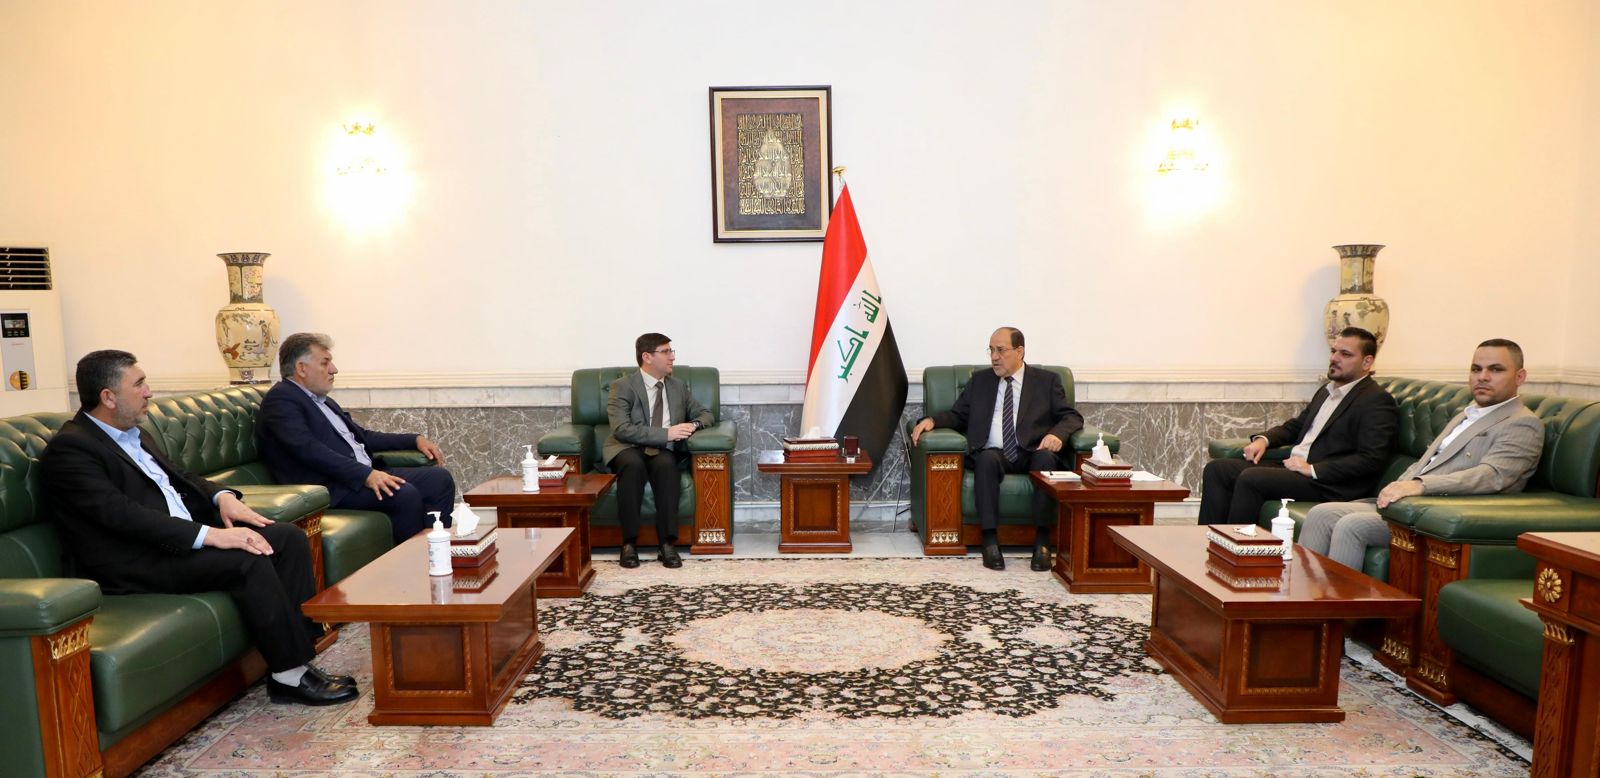 State of Law Coalition claims six government positions in Nineveh